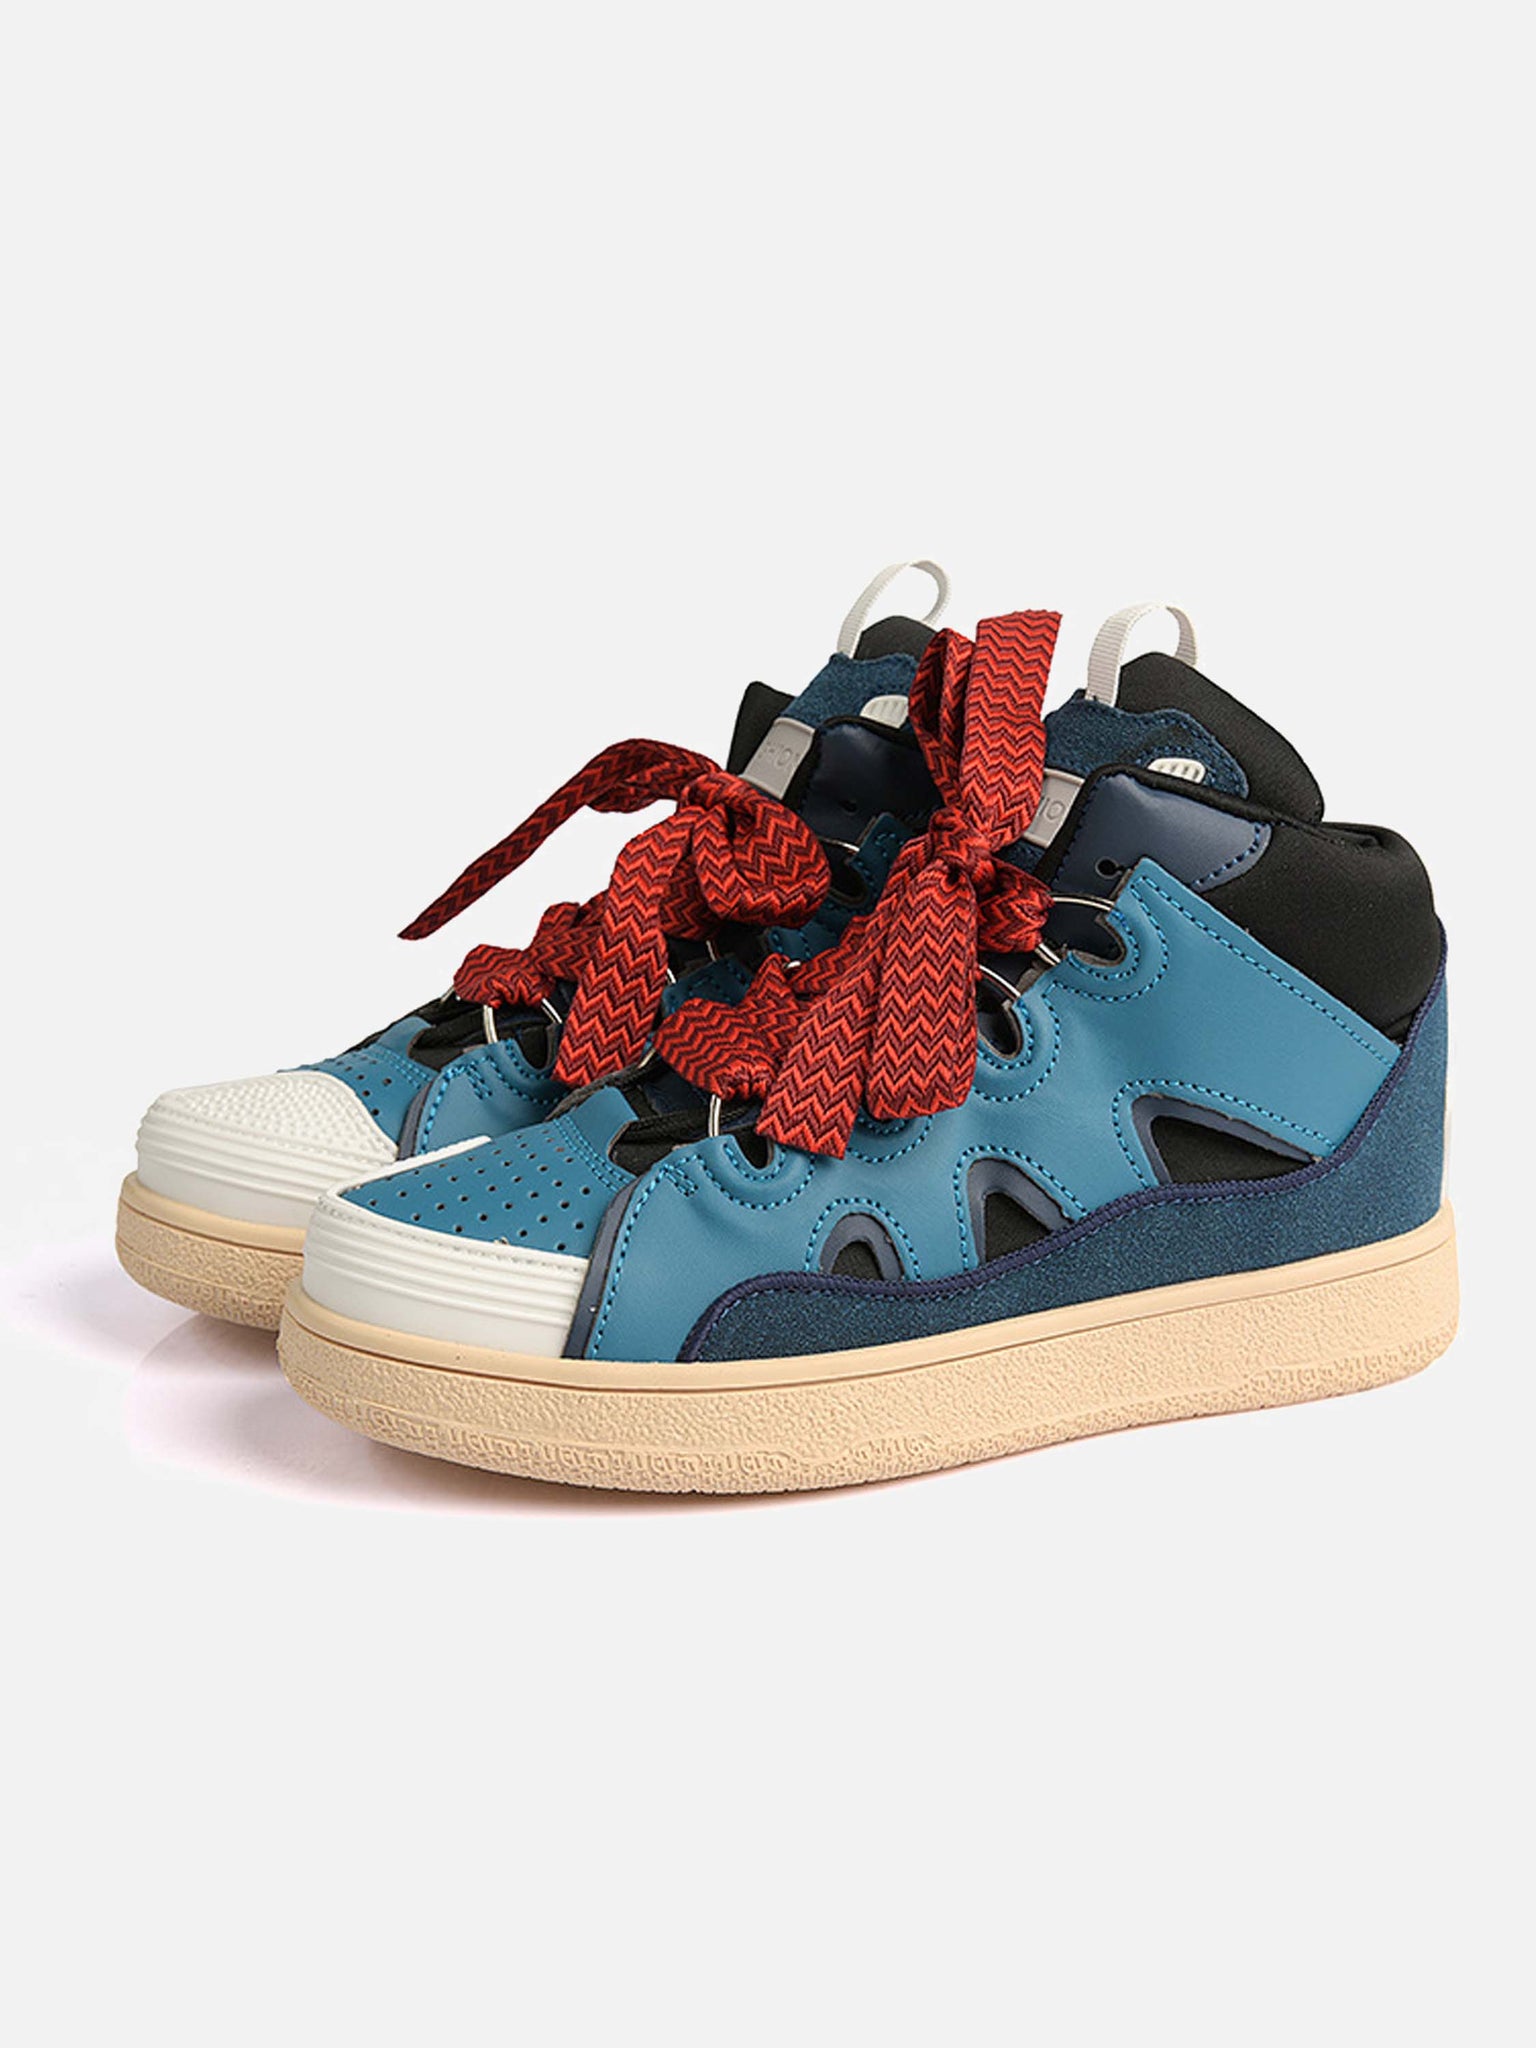 The Supermade American Hip Hop High Top Casual Sneakers